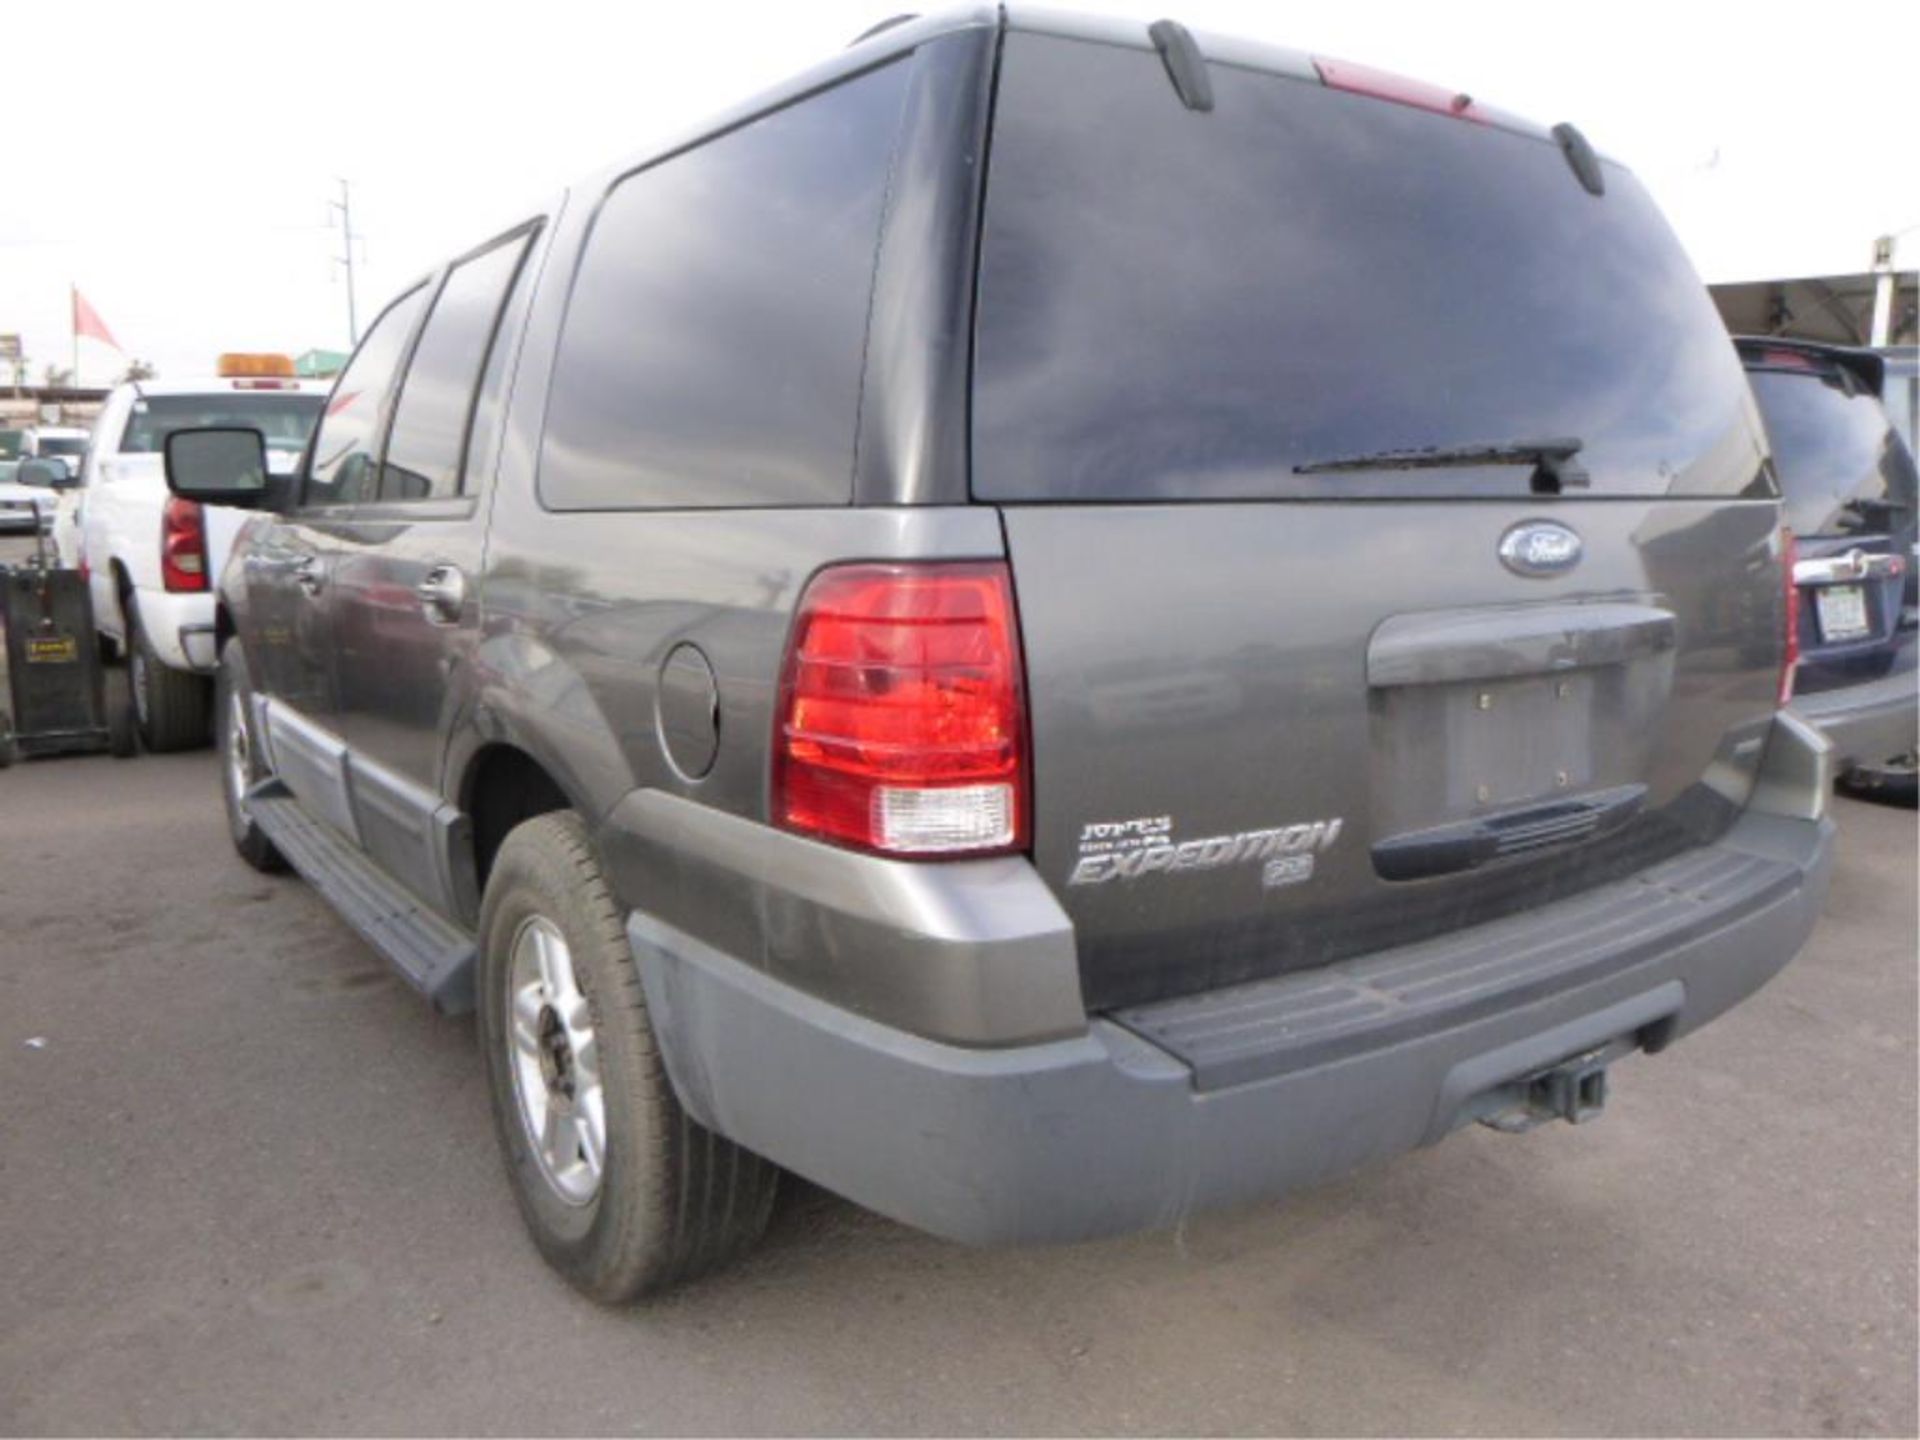 2004 Ford Expedition - Image 2 of 10